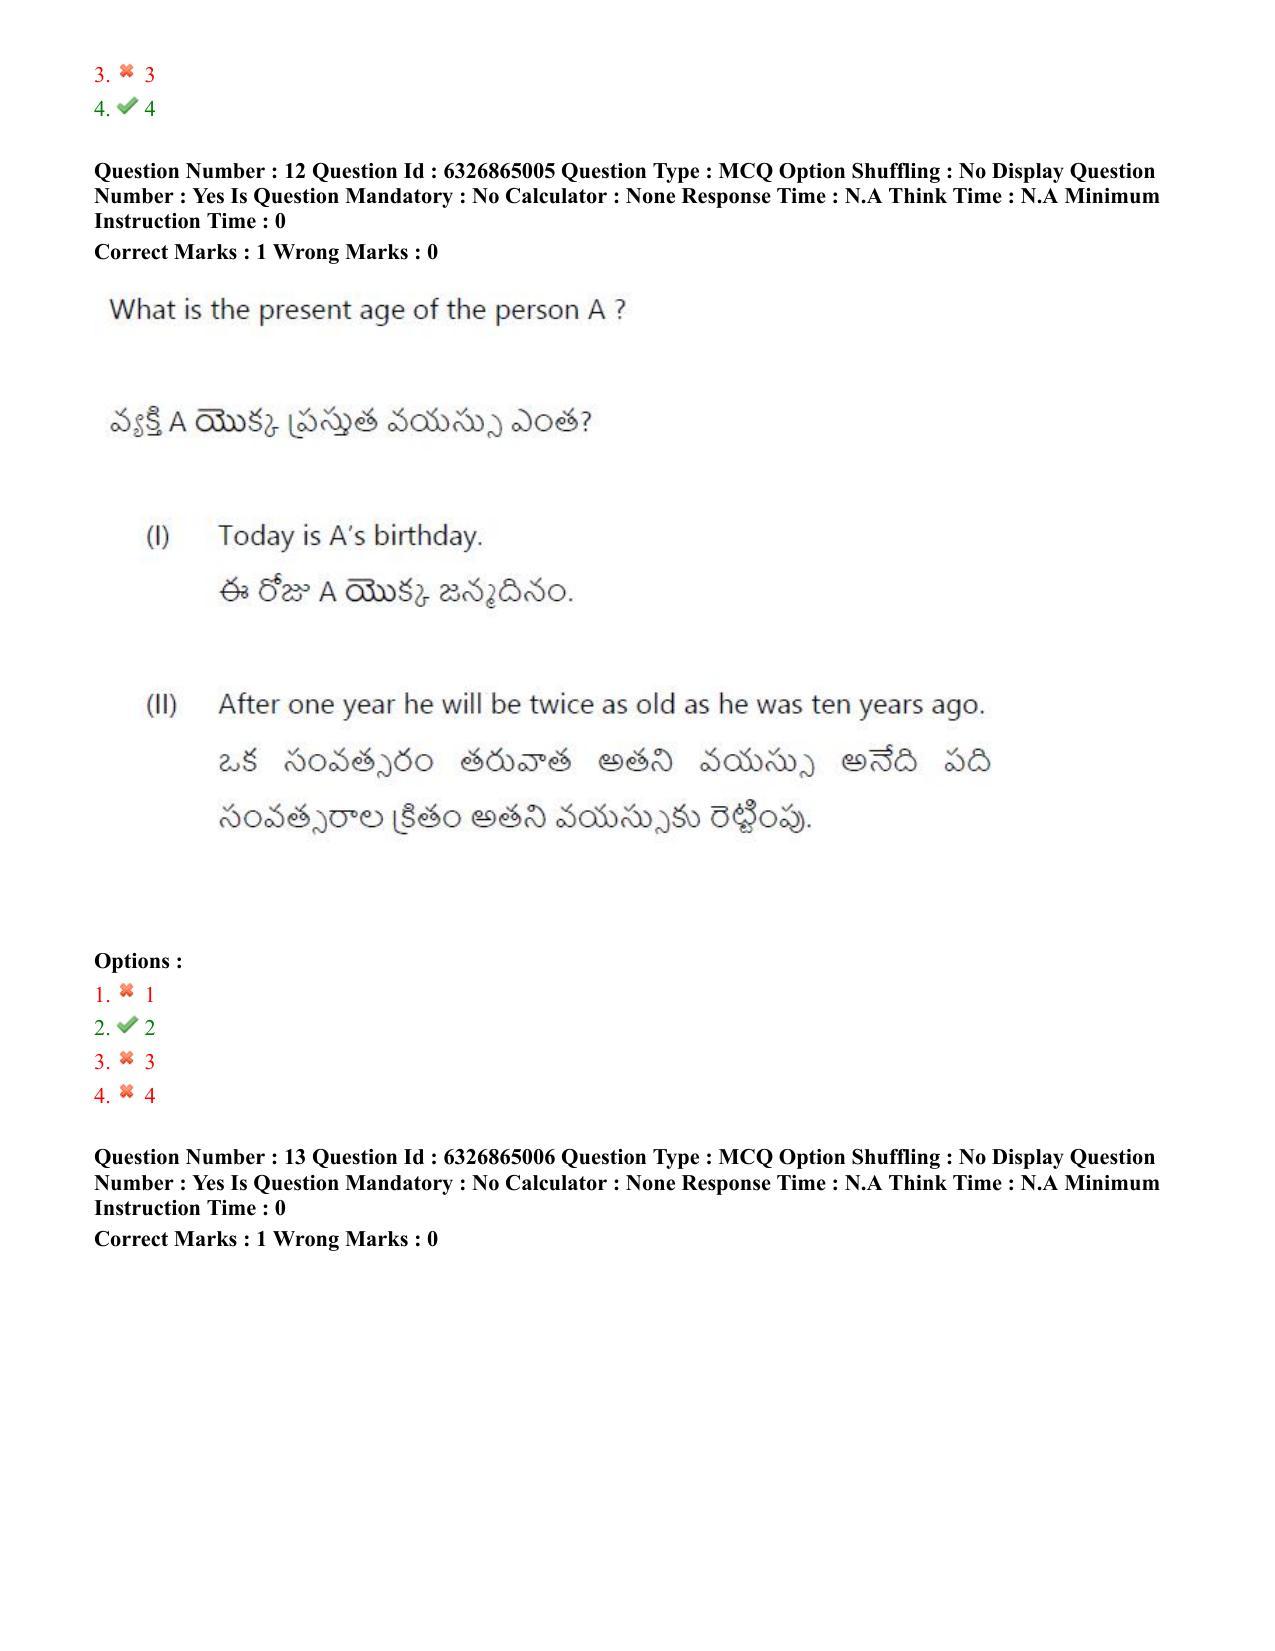 TS ICET 2022 Question Paper 2 - Jul 28, 2022	 - Page 11